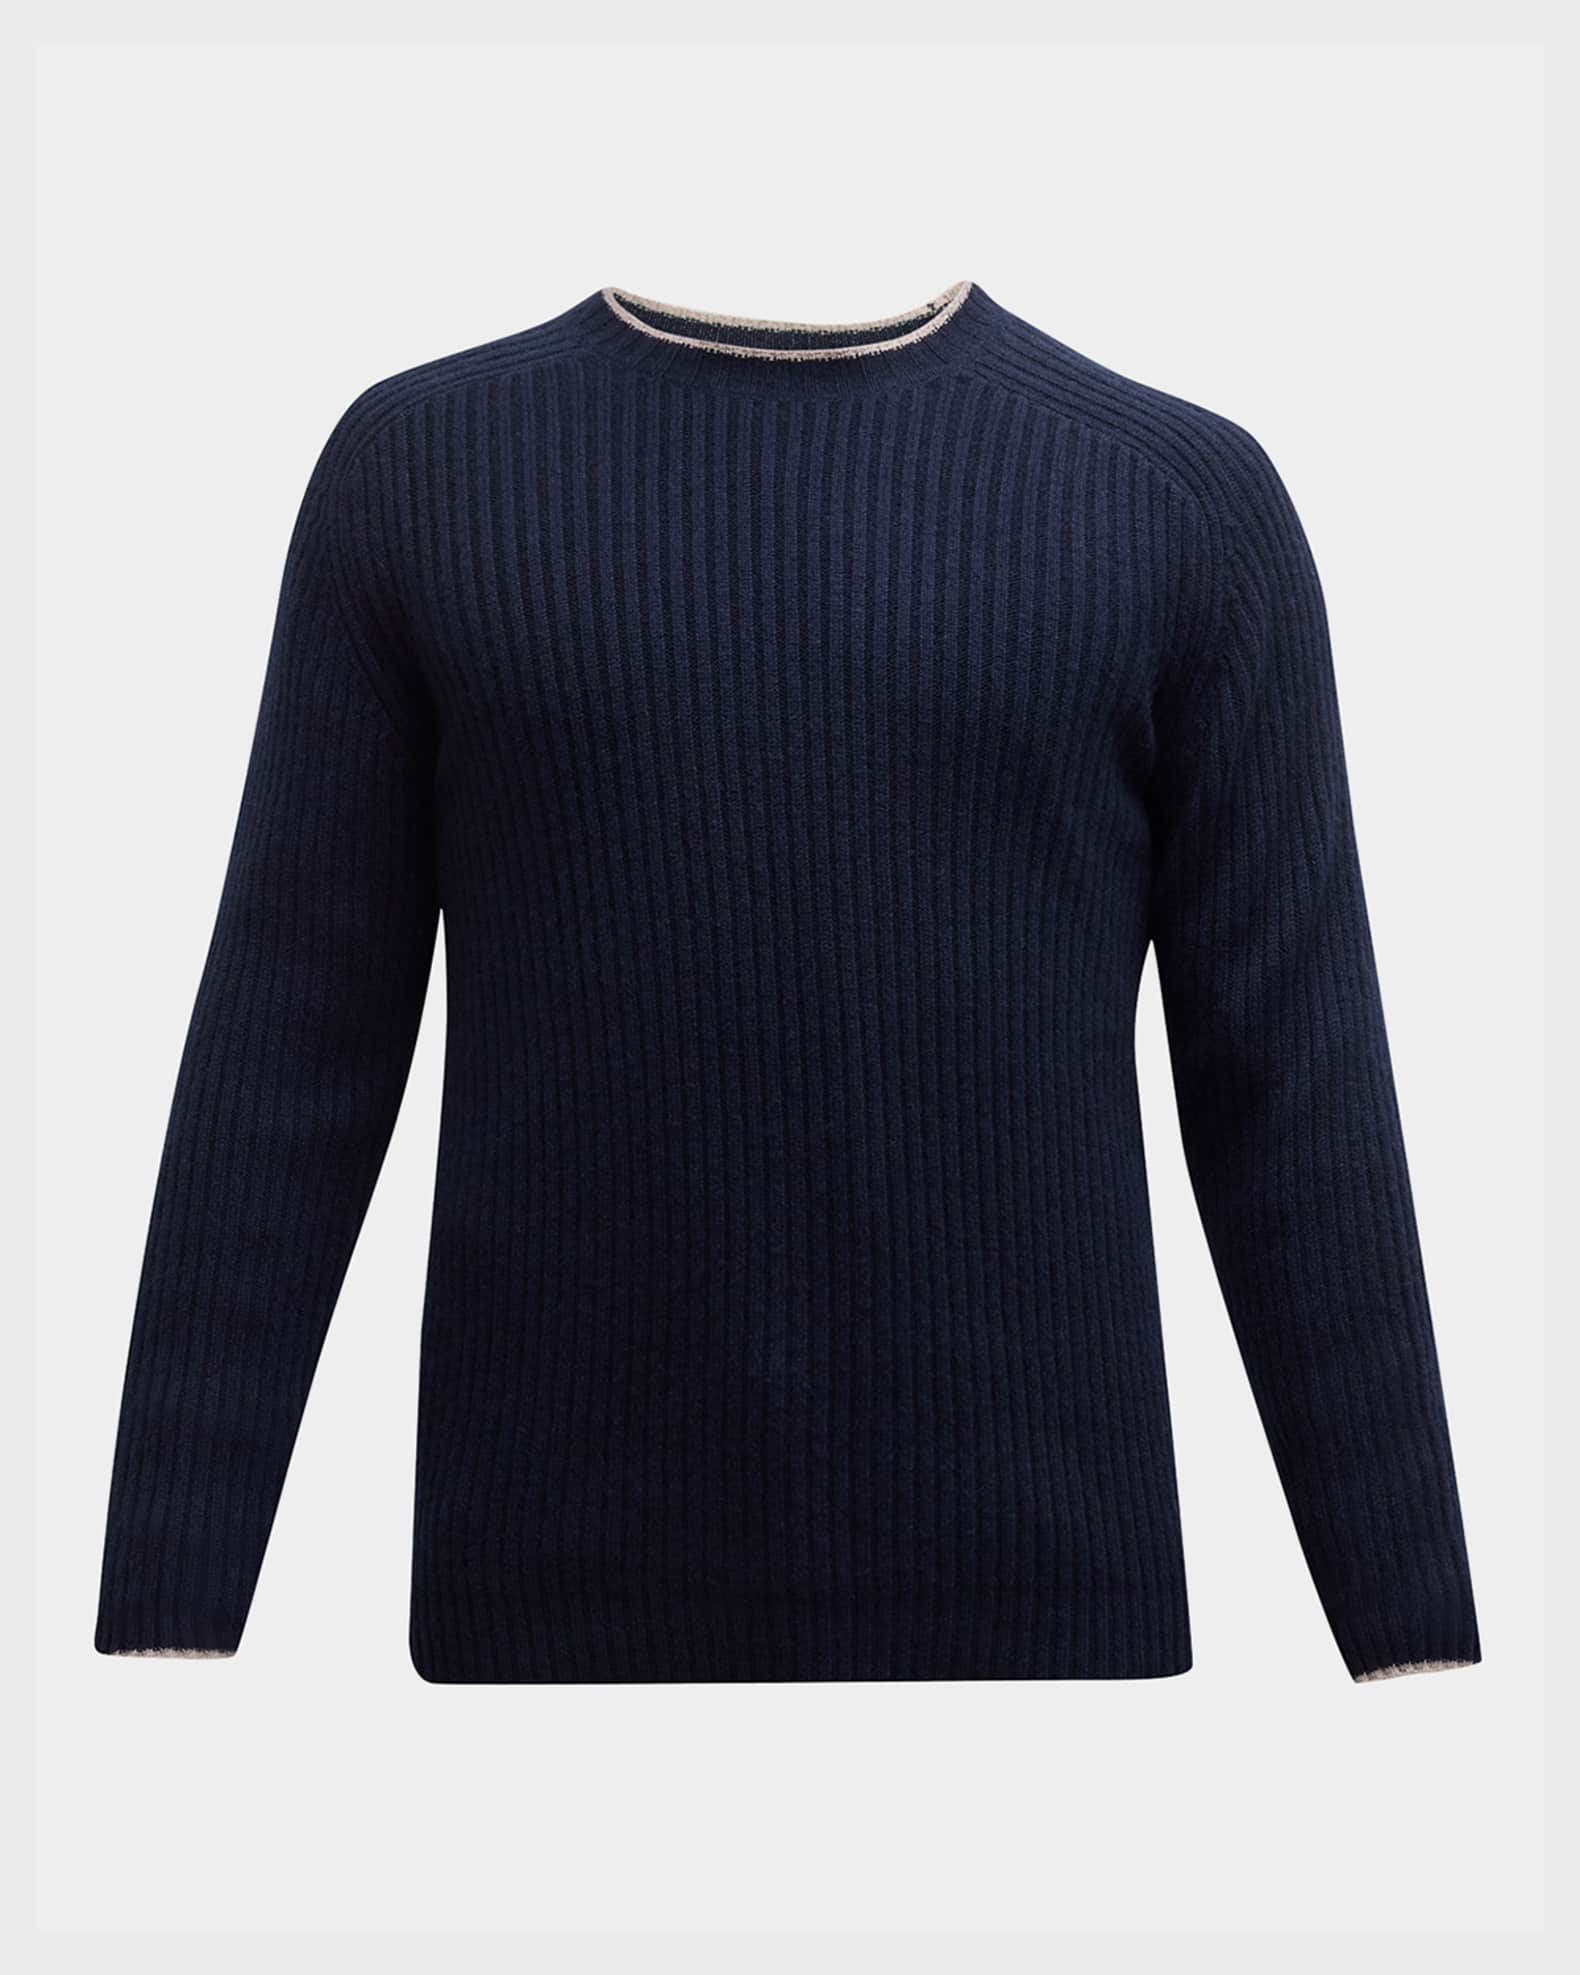 Neiman Marcus Men's Wool-Cashmere Ribbed Crewneck Sweater with Tipping ...